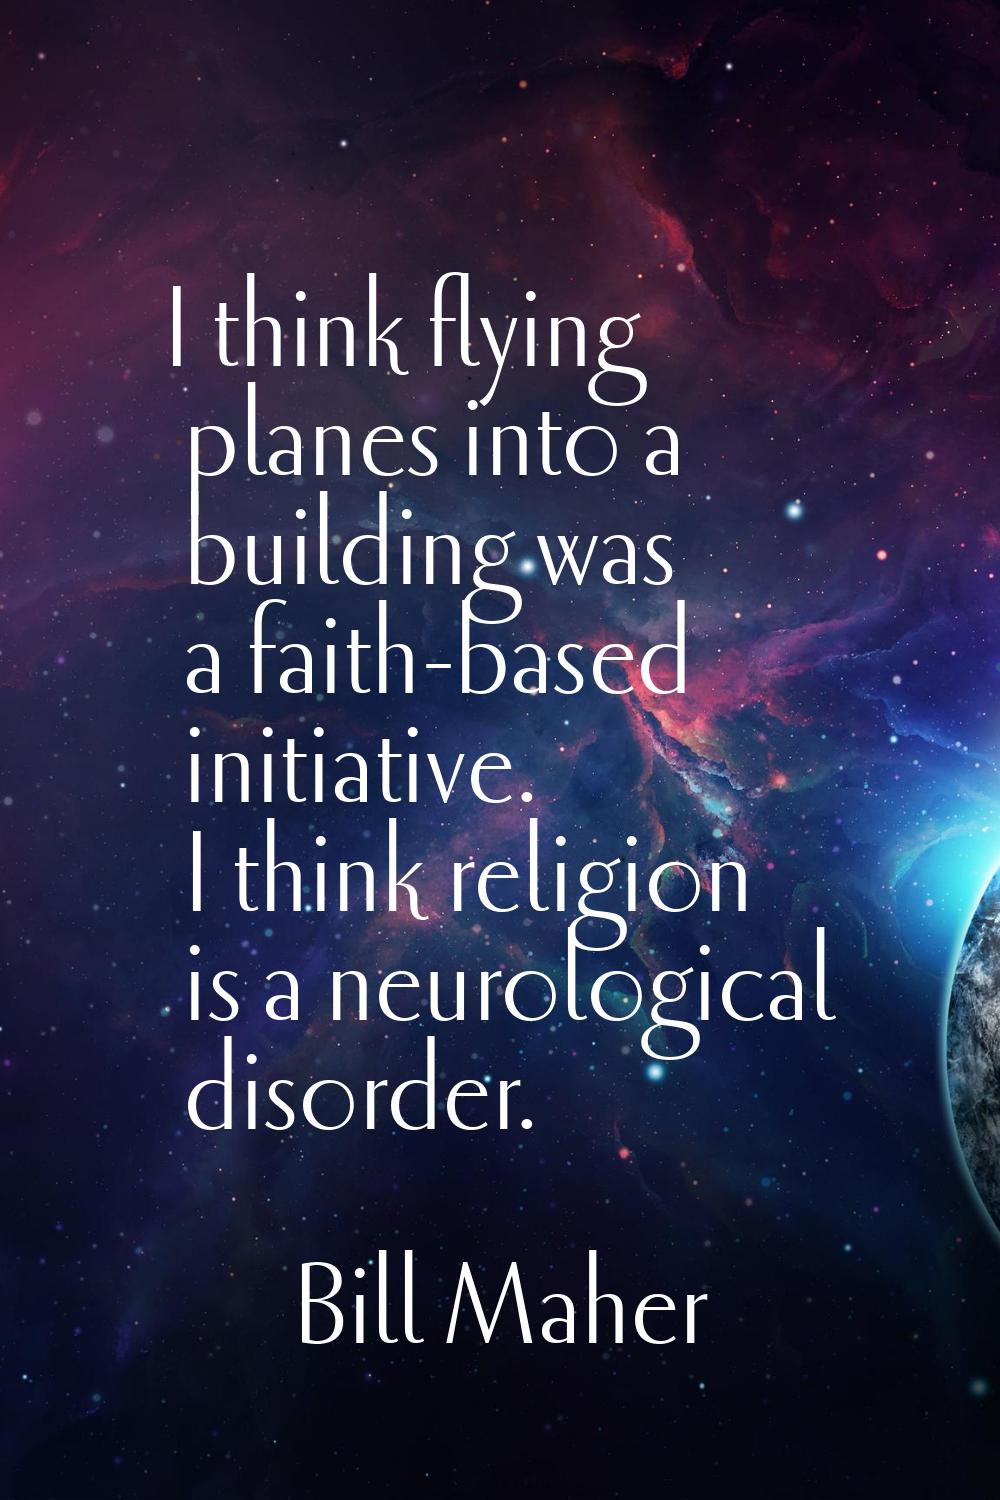 I think flying planes into a building was a faith-based initiative. I think religion is a neurologi